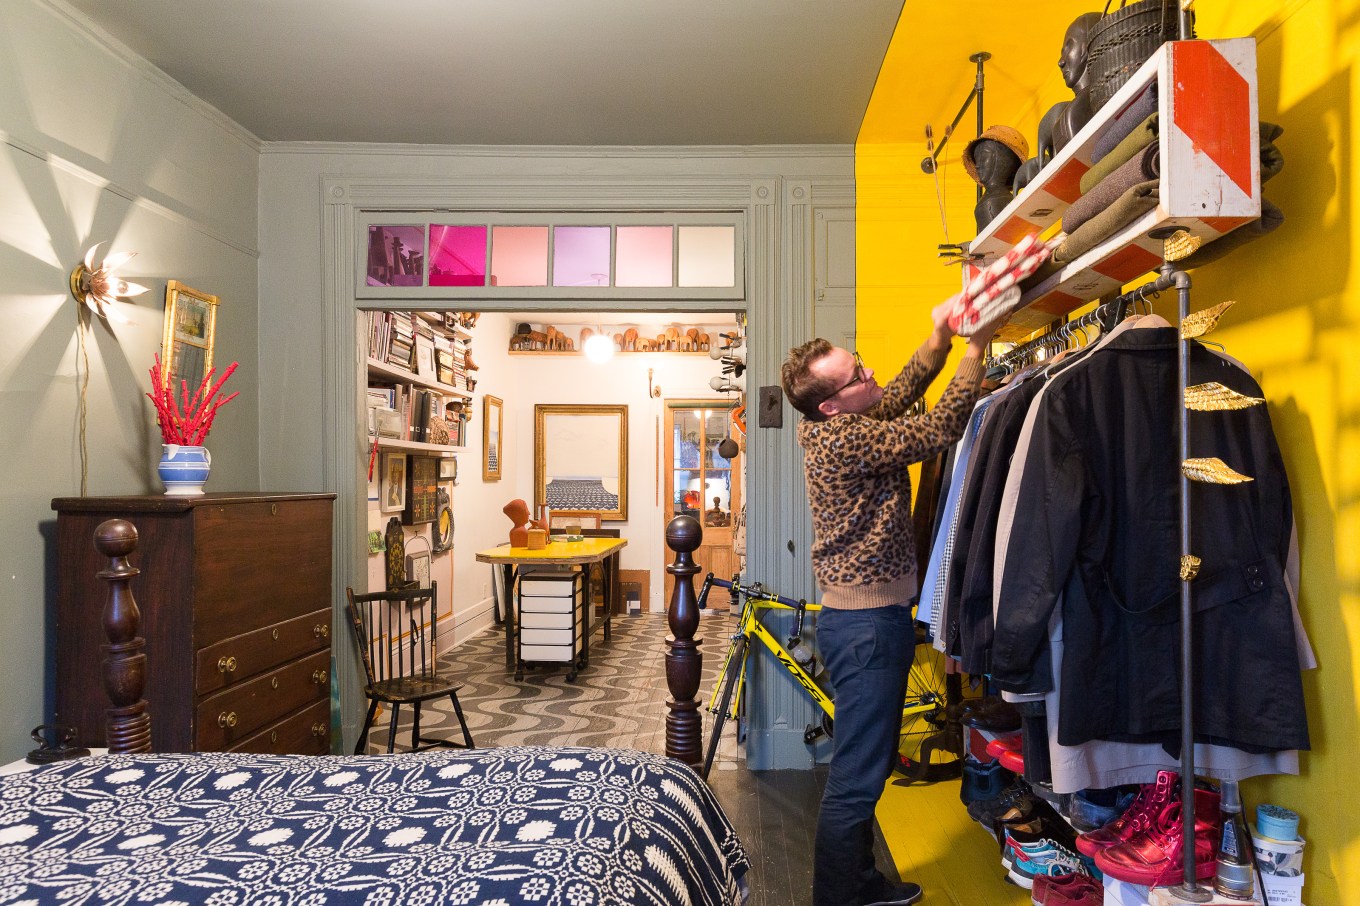 Apartment Storage Tips -- Where to Look for Extra Space in Your